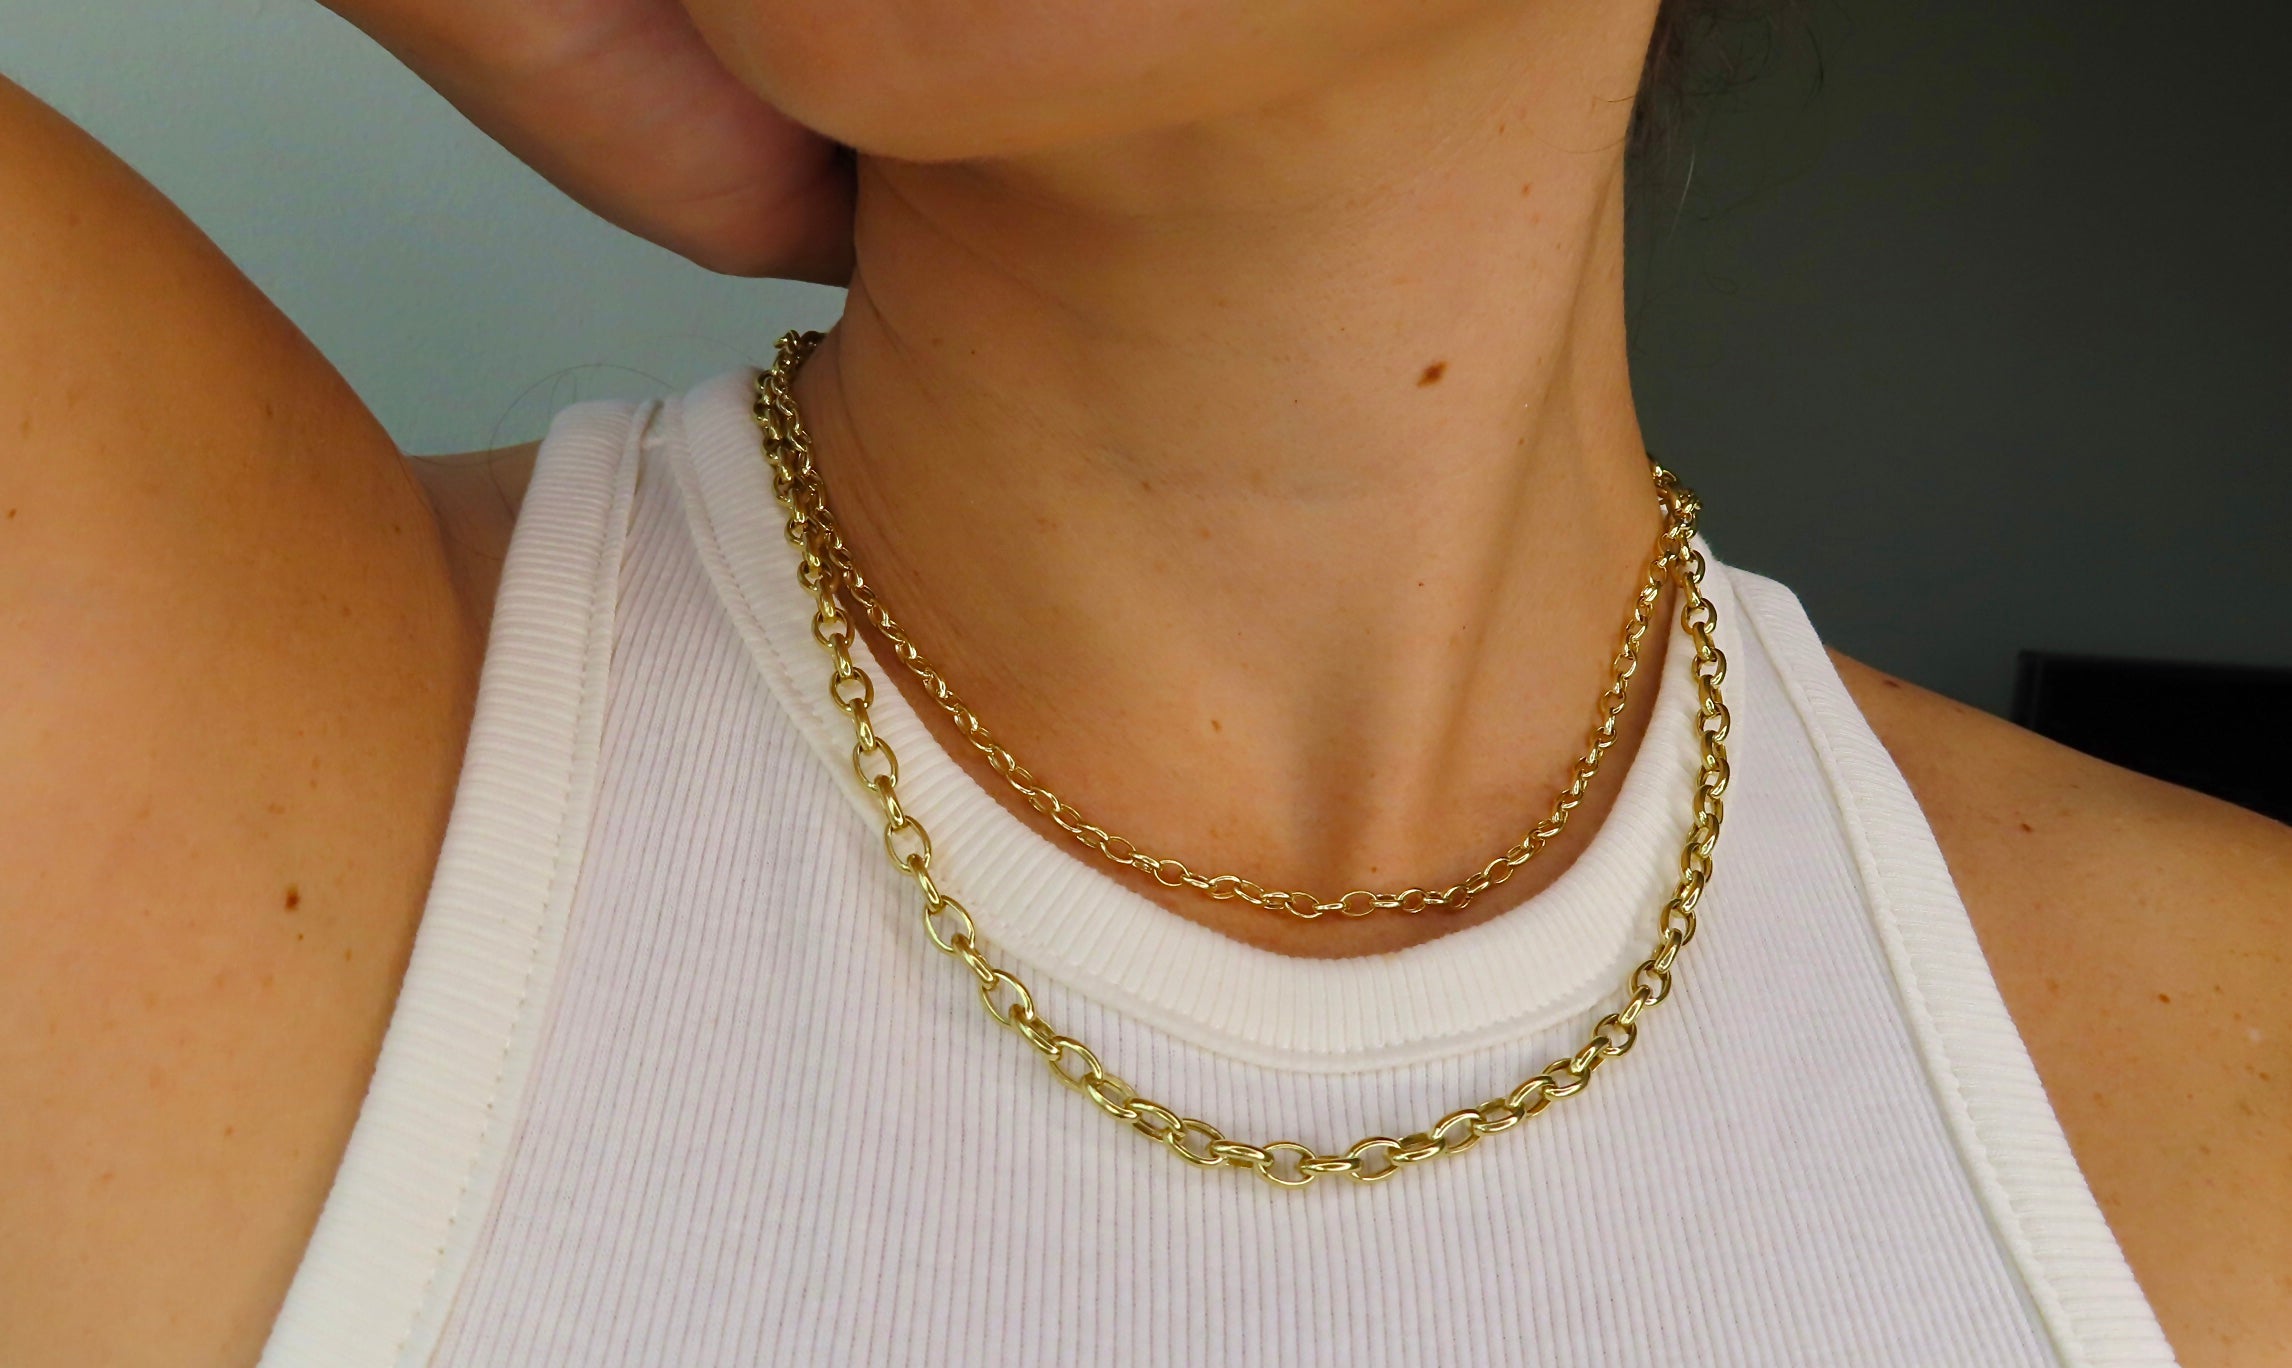 Chain Necklace in Yellow Gold, 18